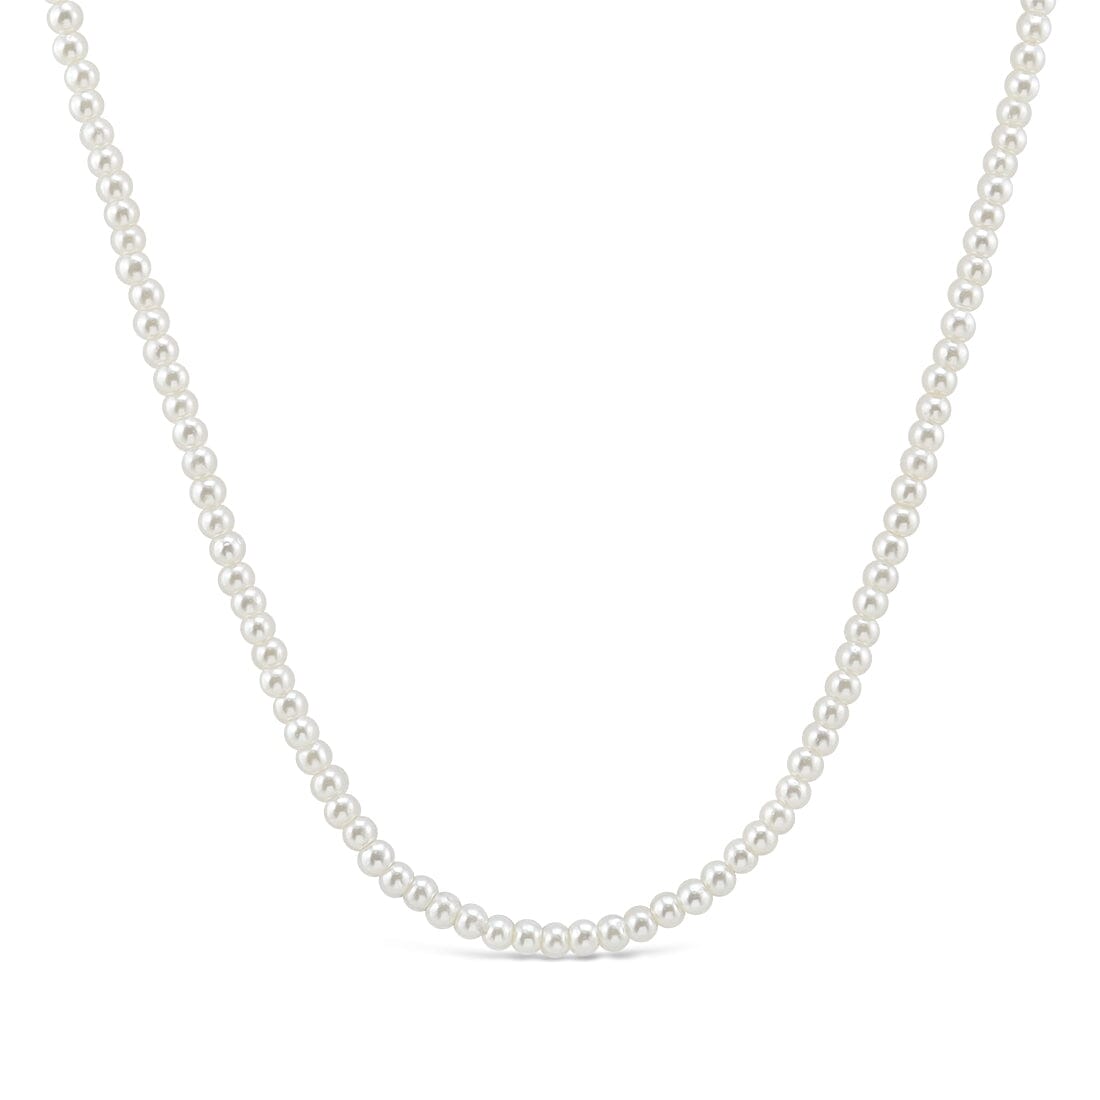 Synthetic Pearl Necklace in Sterling Silver Necklaces Bevilles 